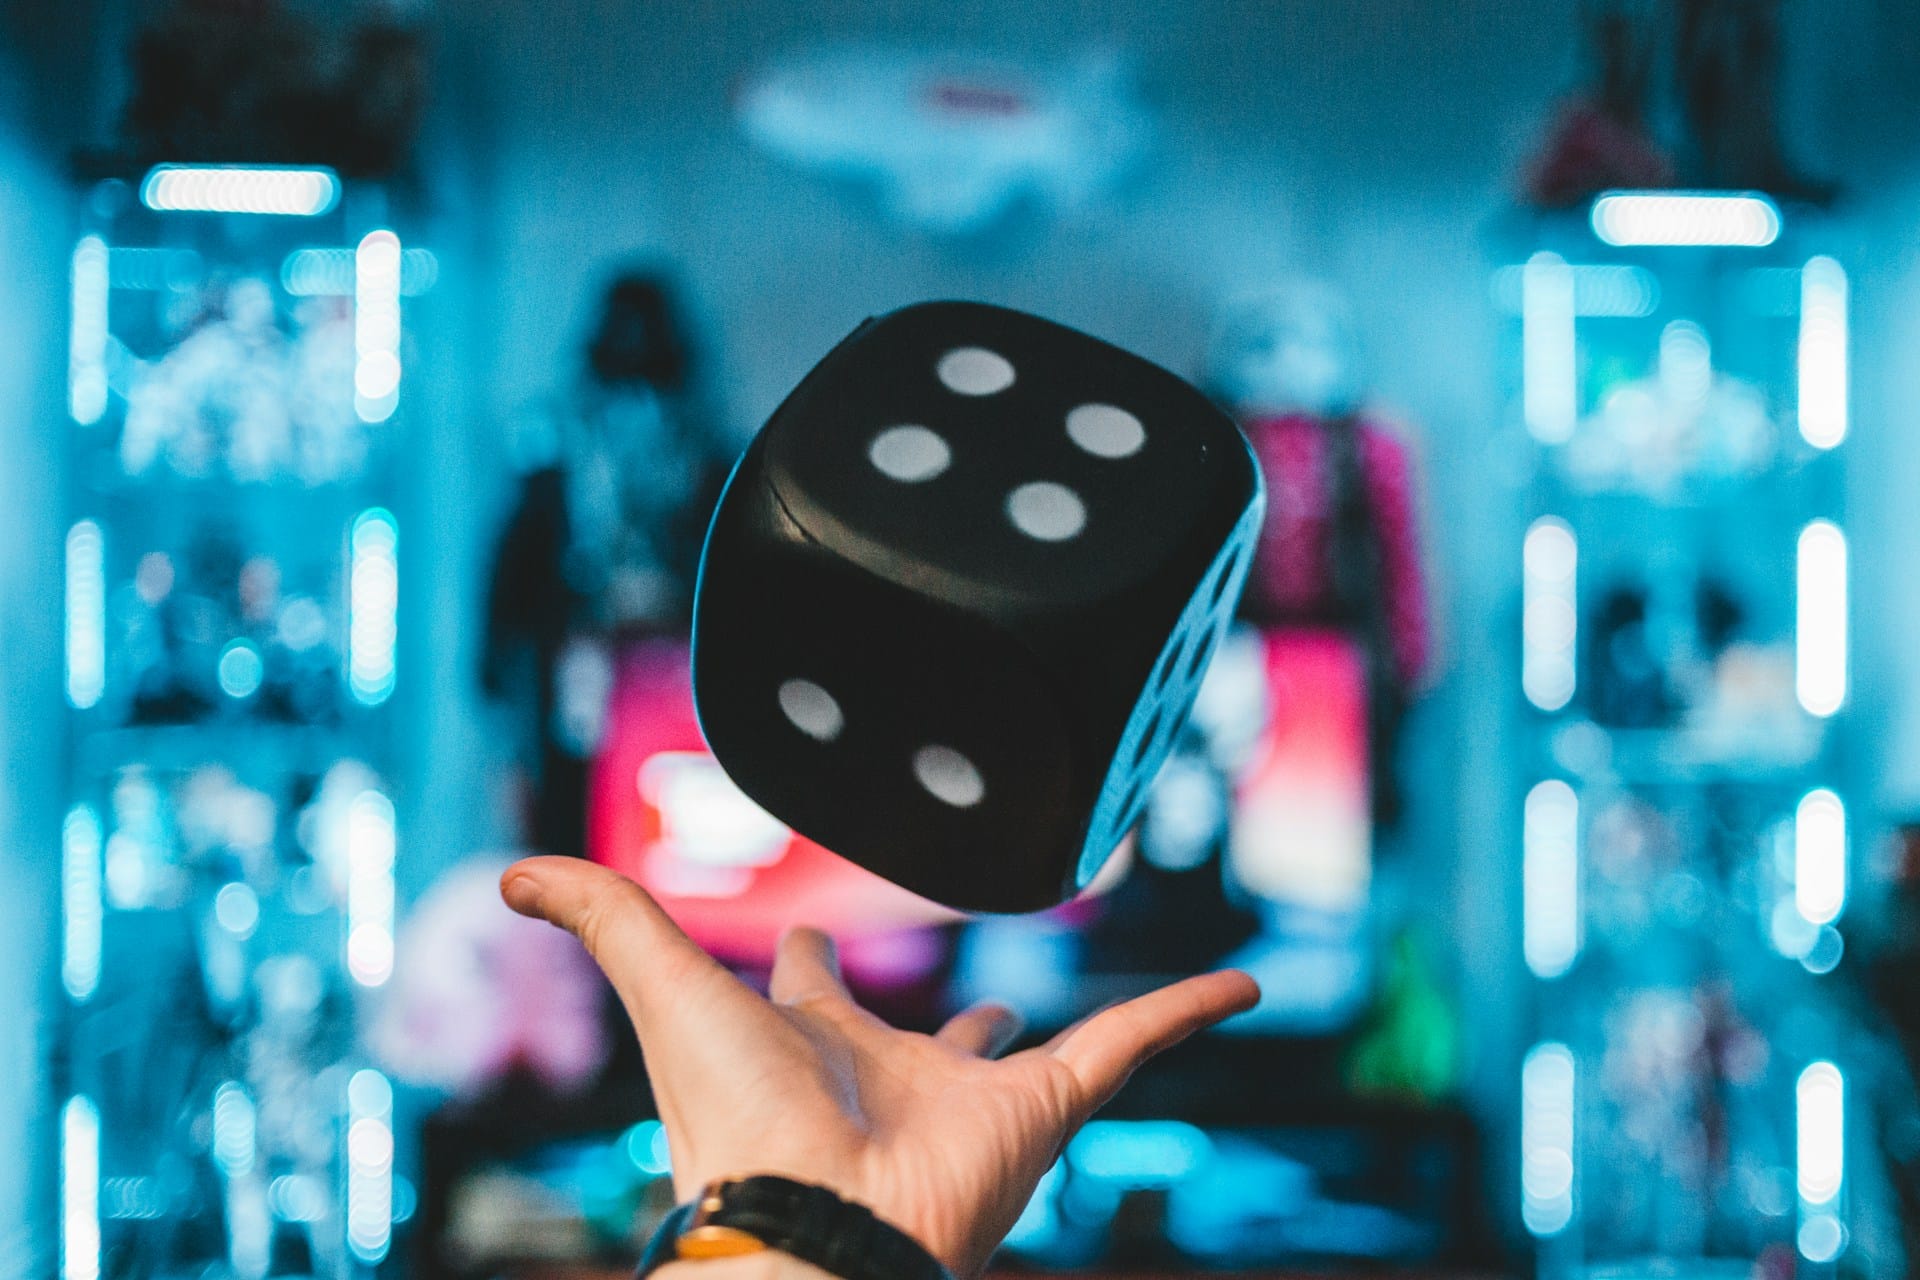 image of a hand throwing a large black dice into the air against a blurred background of neon lights